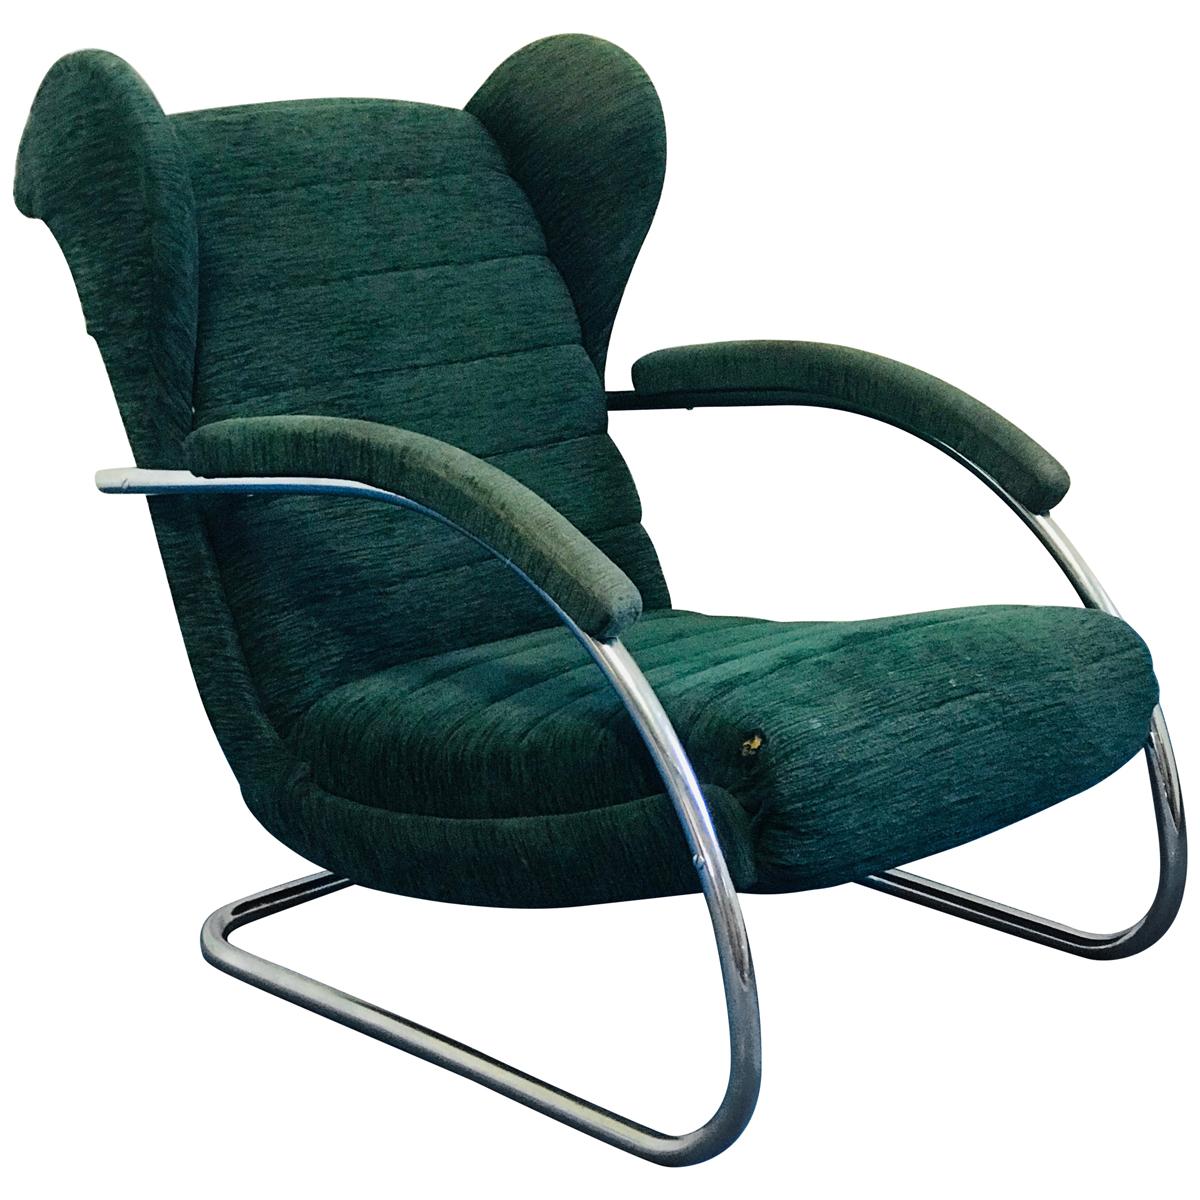 Thonet Chair, "1940" For Sale